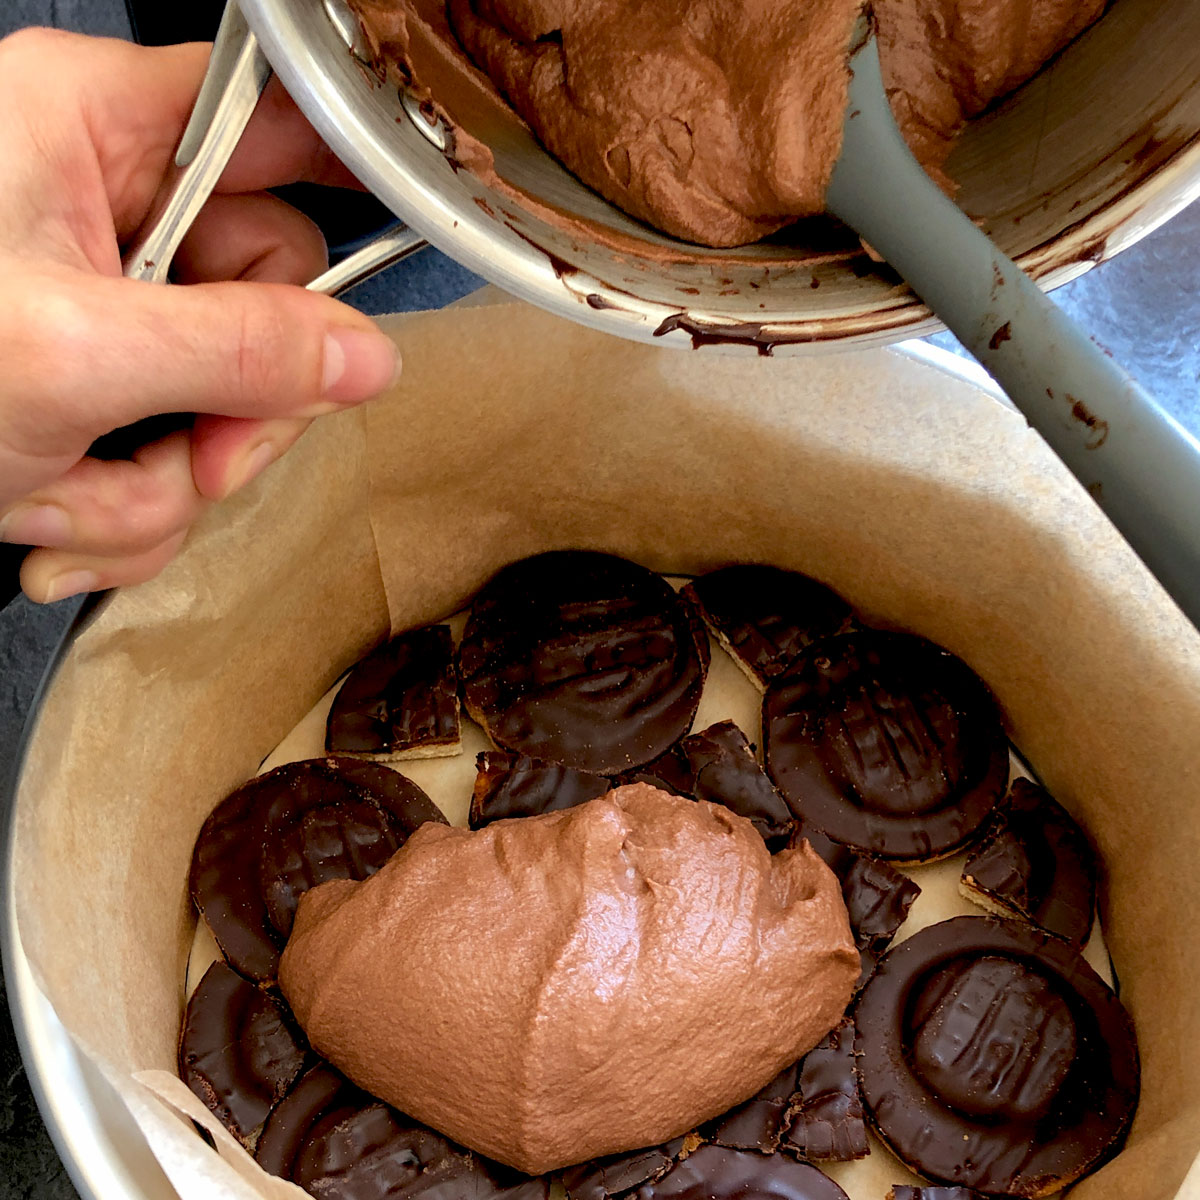 Covering Jaffa cakes with chocolate filling.